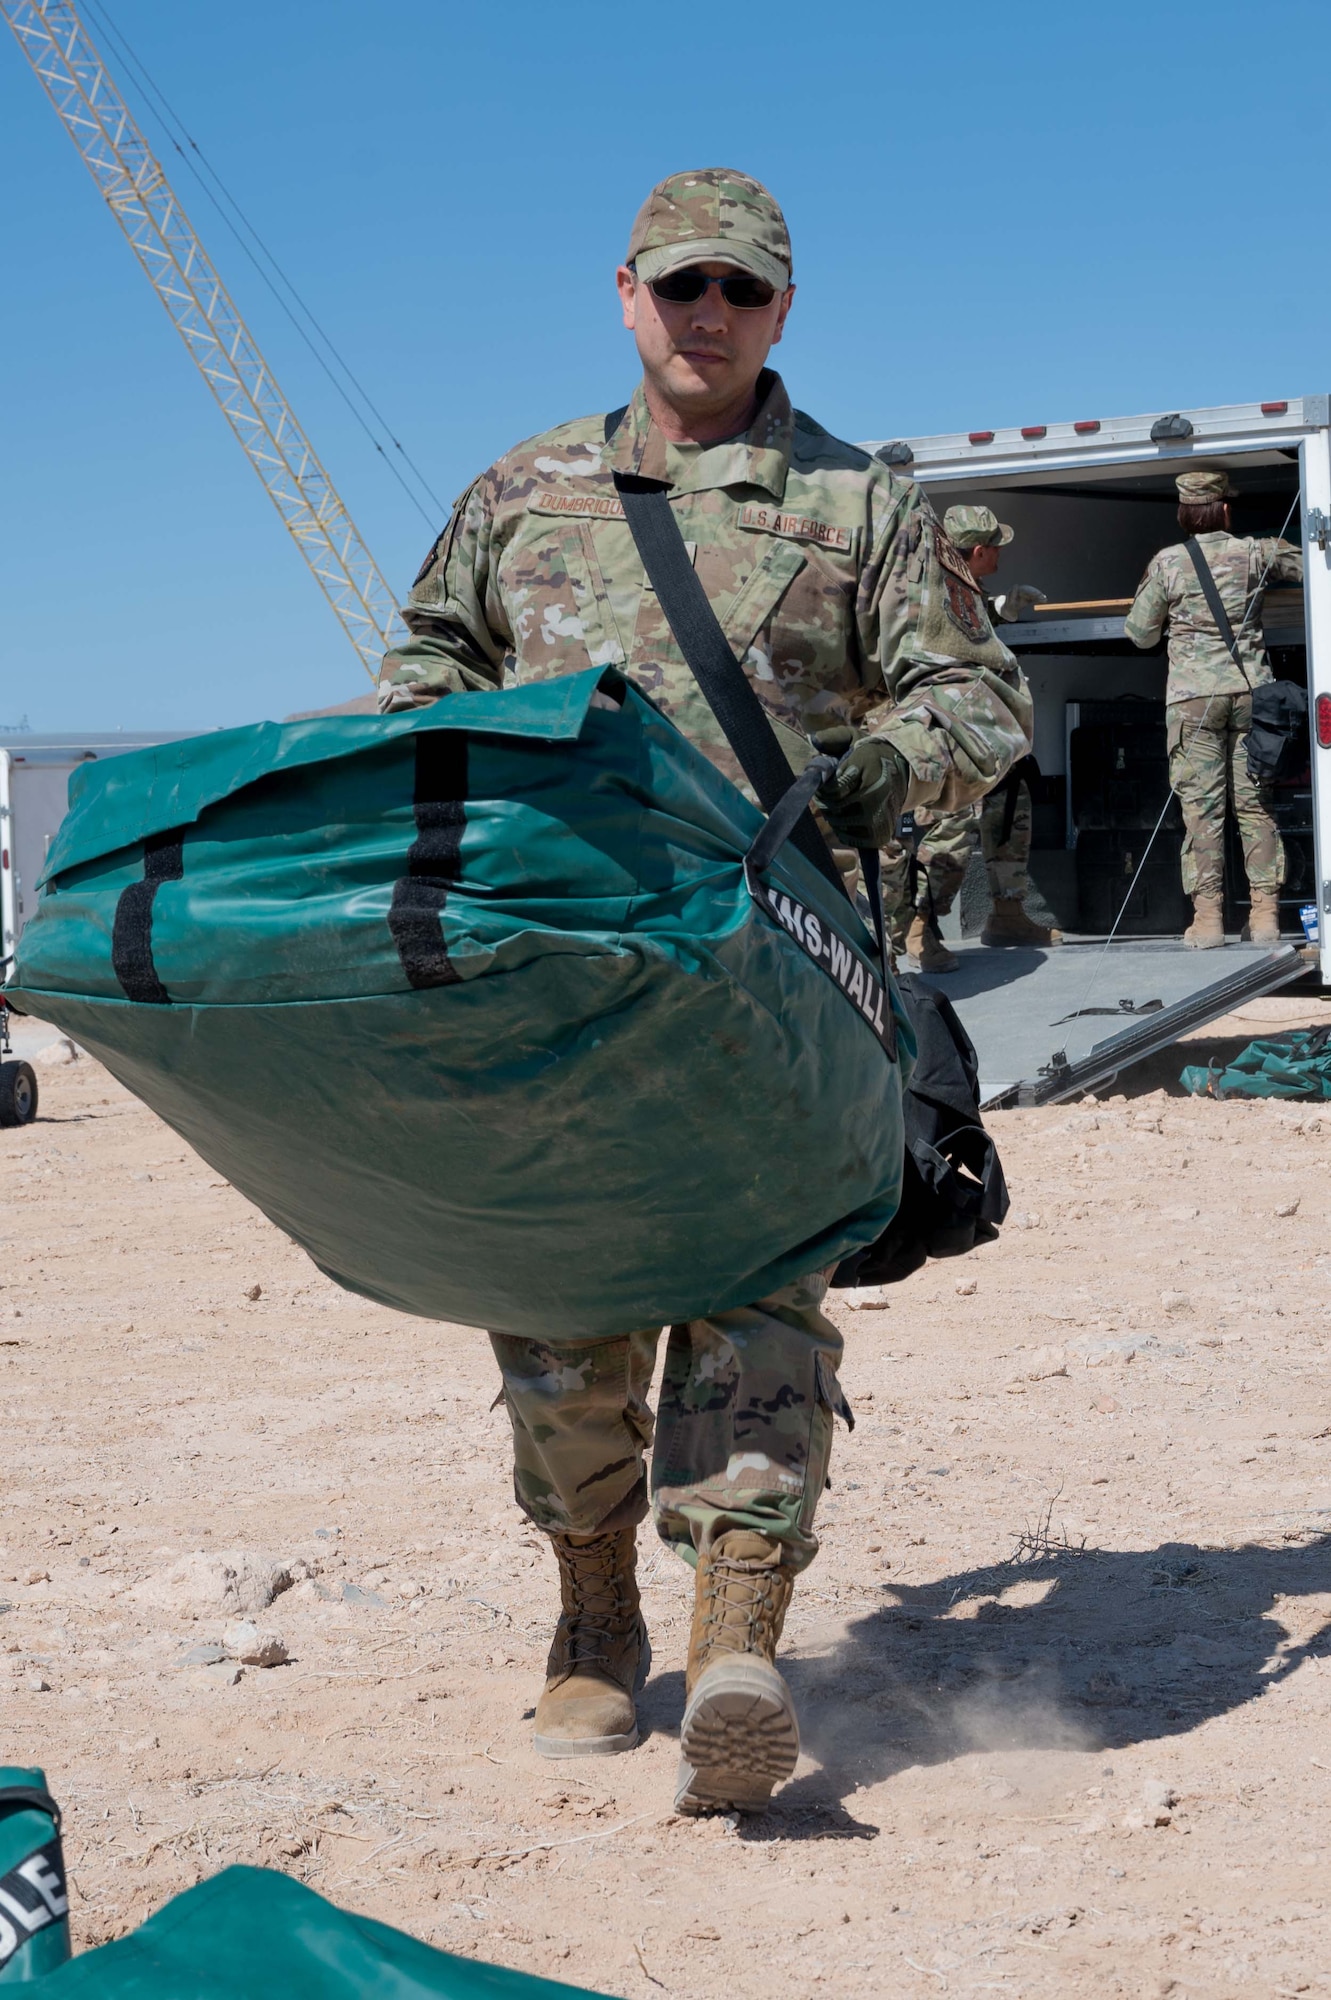 Tech. Sgt. Daniel Dumbrique, 162nd FSS Specialist, unloads equipment during an in-person combined training event with other Air and Army National Guard units this week in Las Vegas.